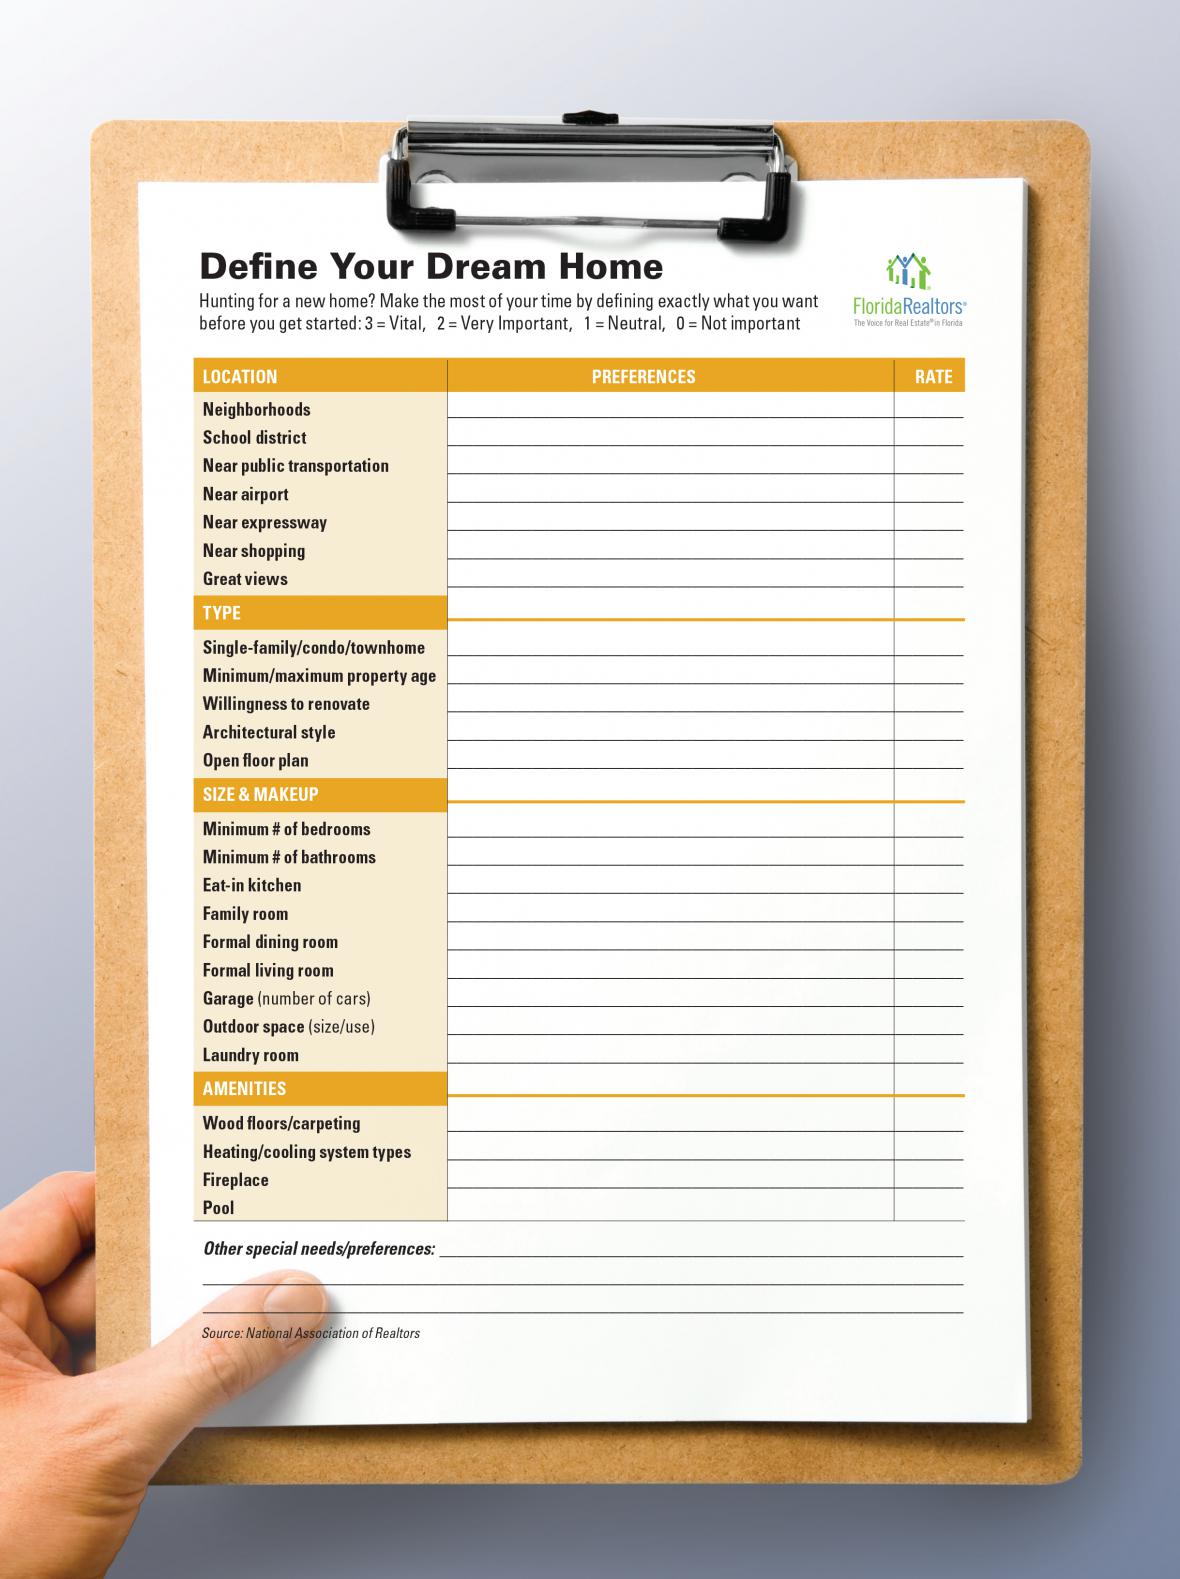 Define Your Dream Home